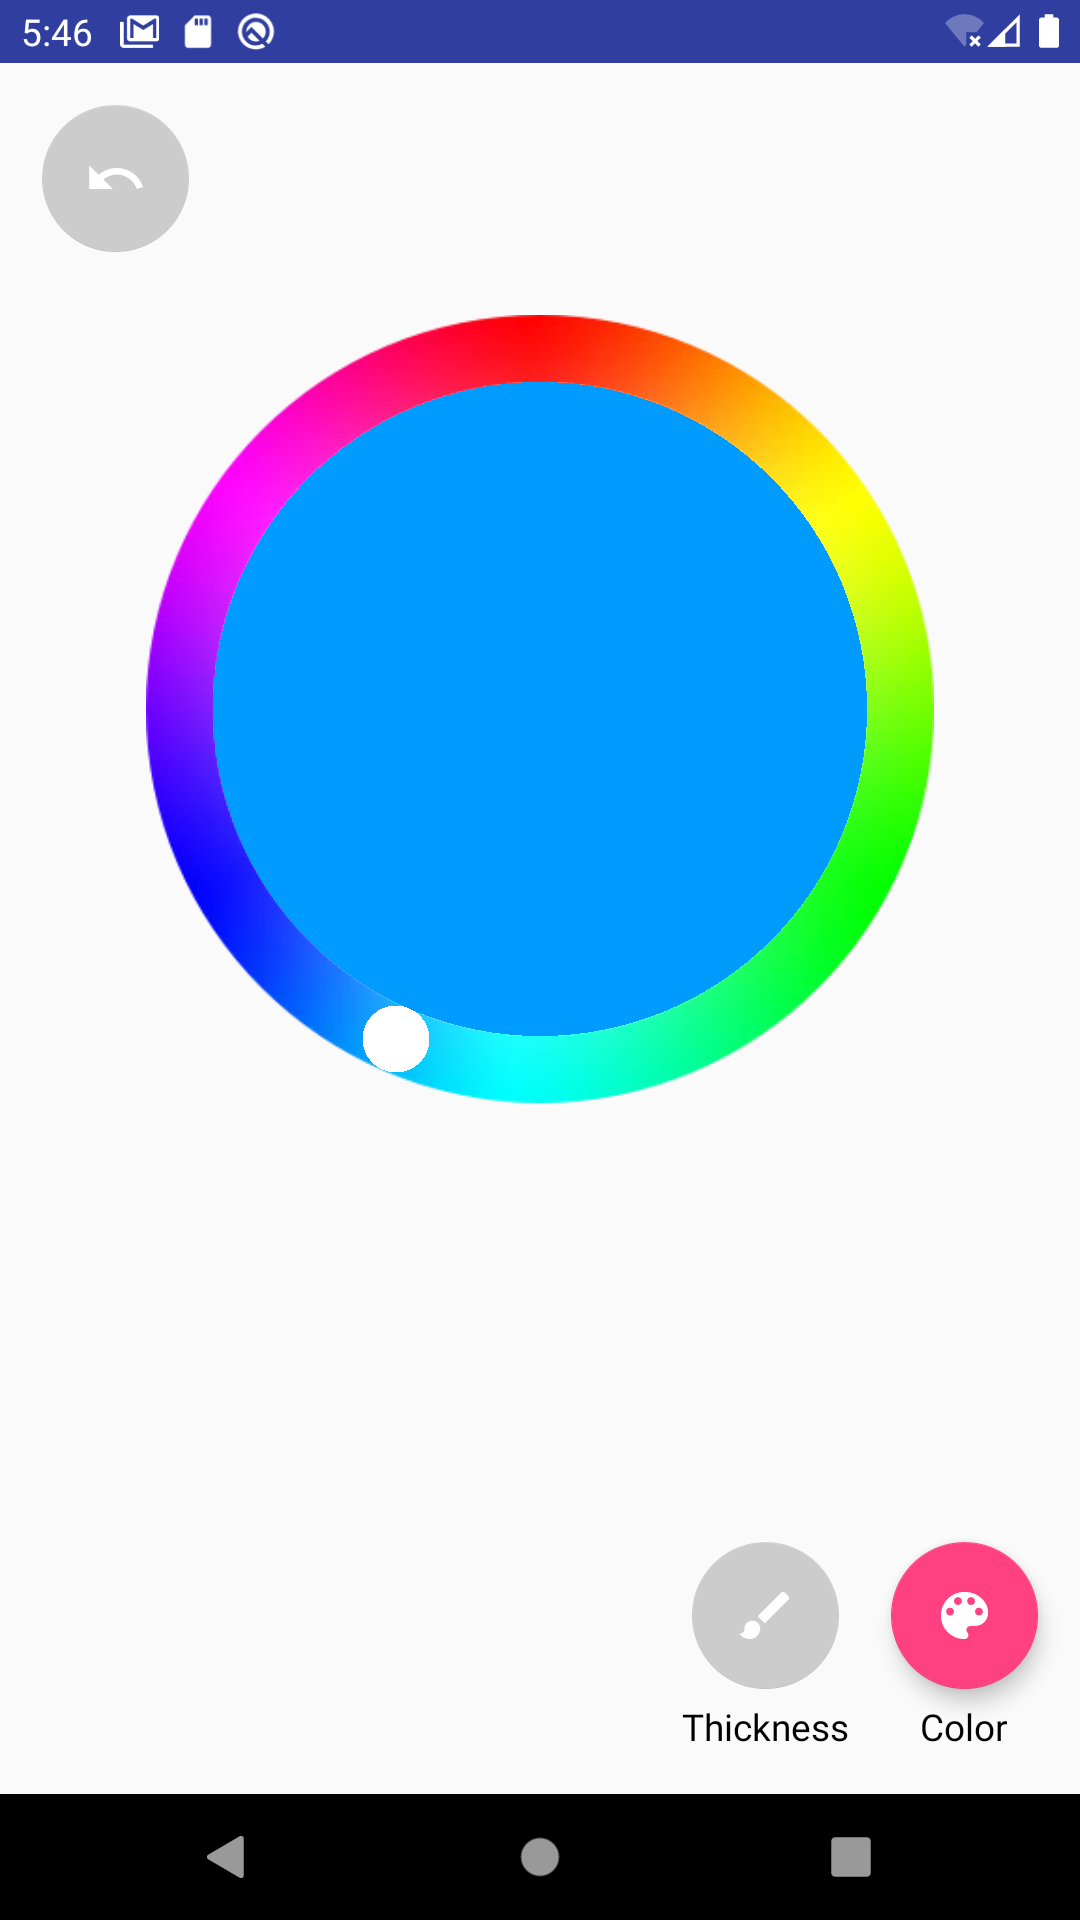 The CircleColorPickerView with a light blue selelected